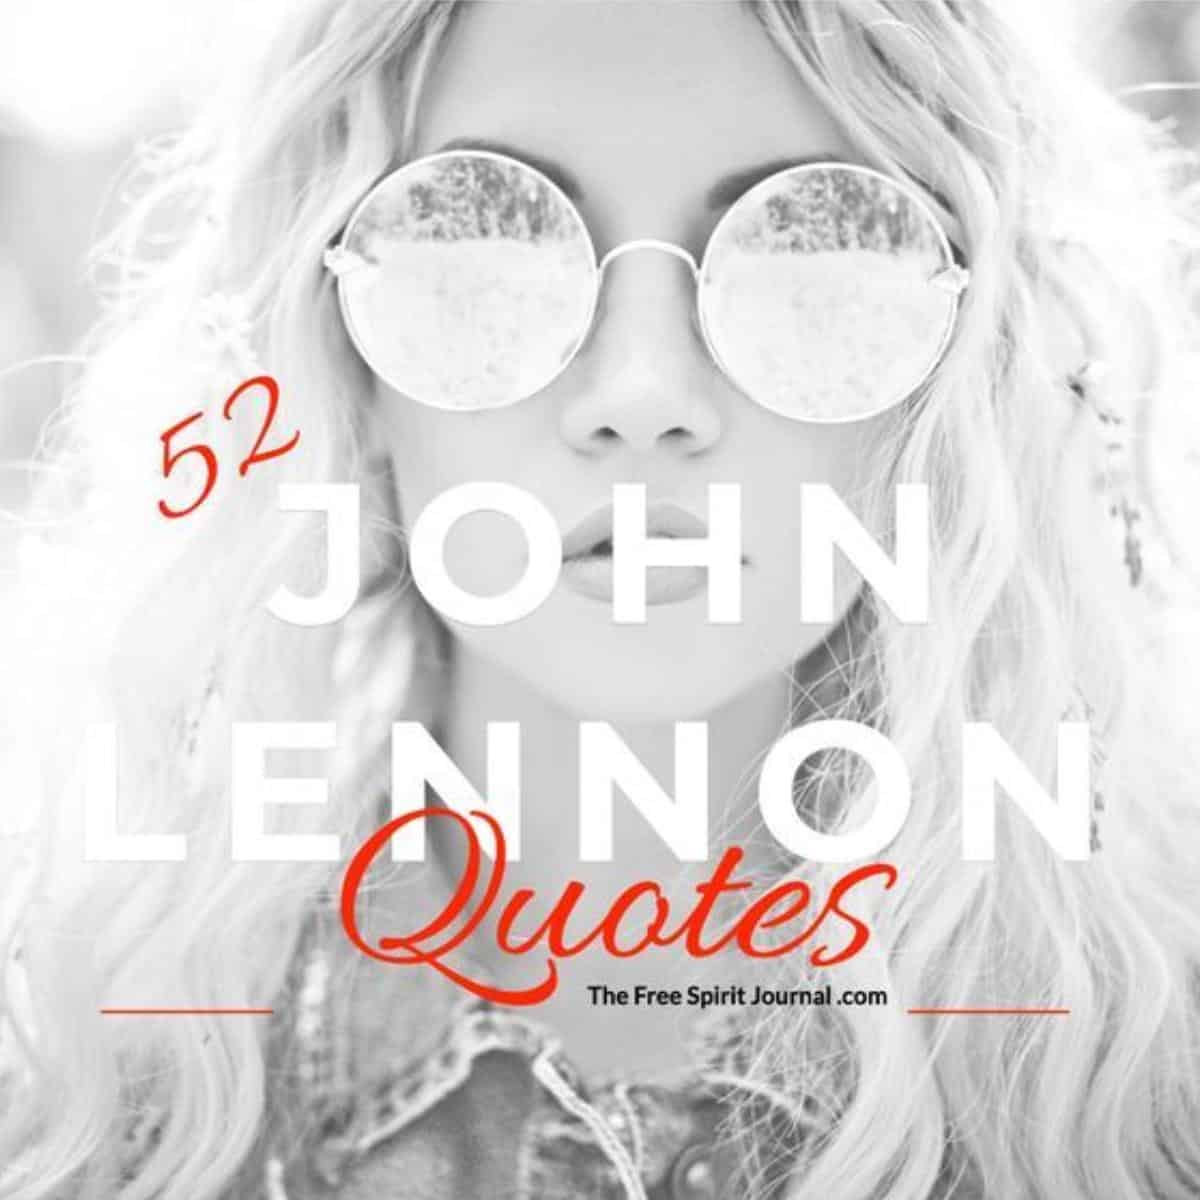 52 John Lennon Quotes For the Dreamer in You